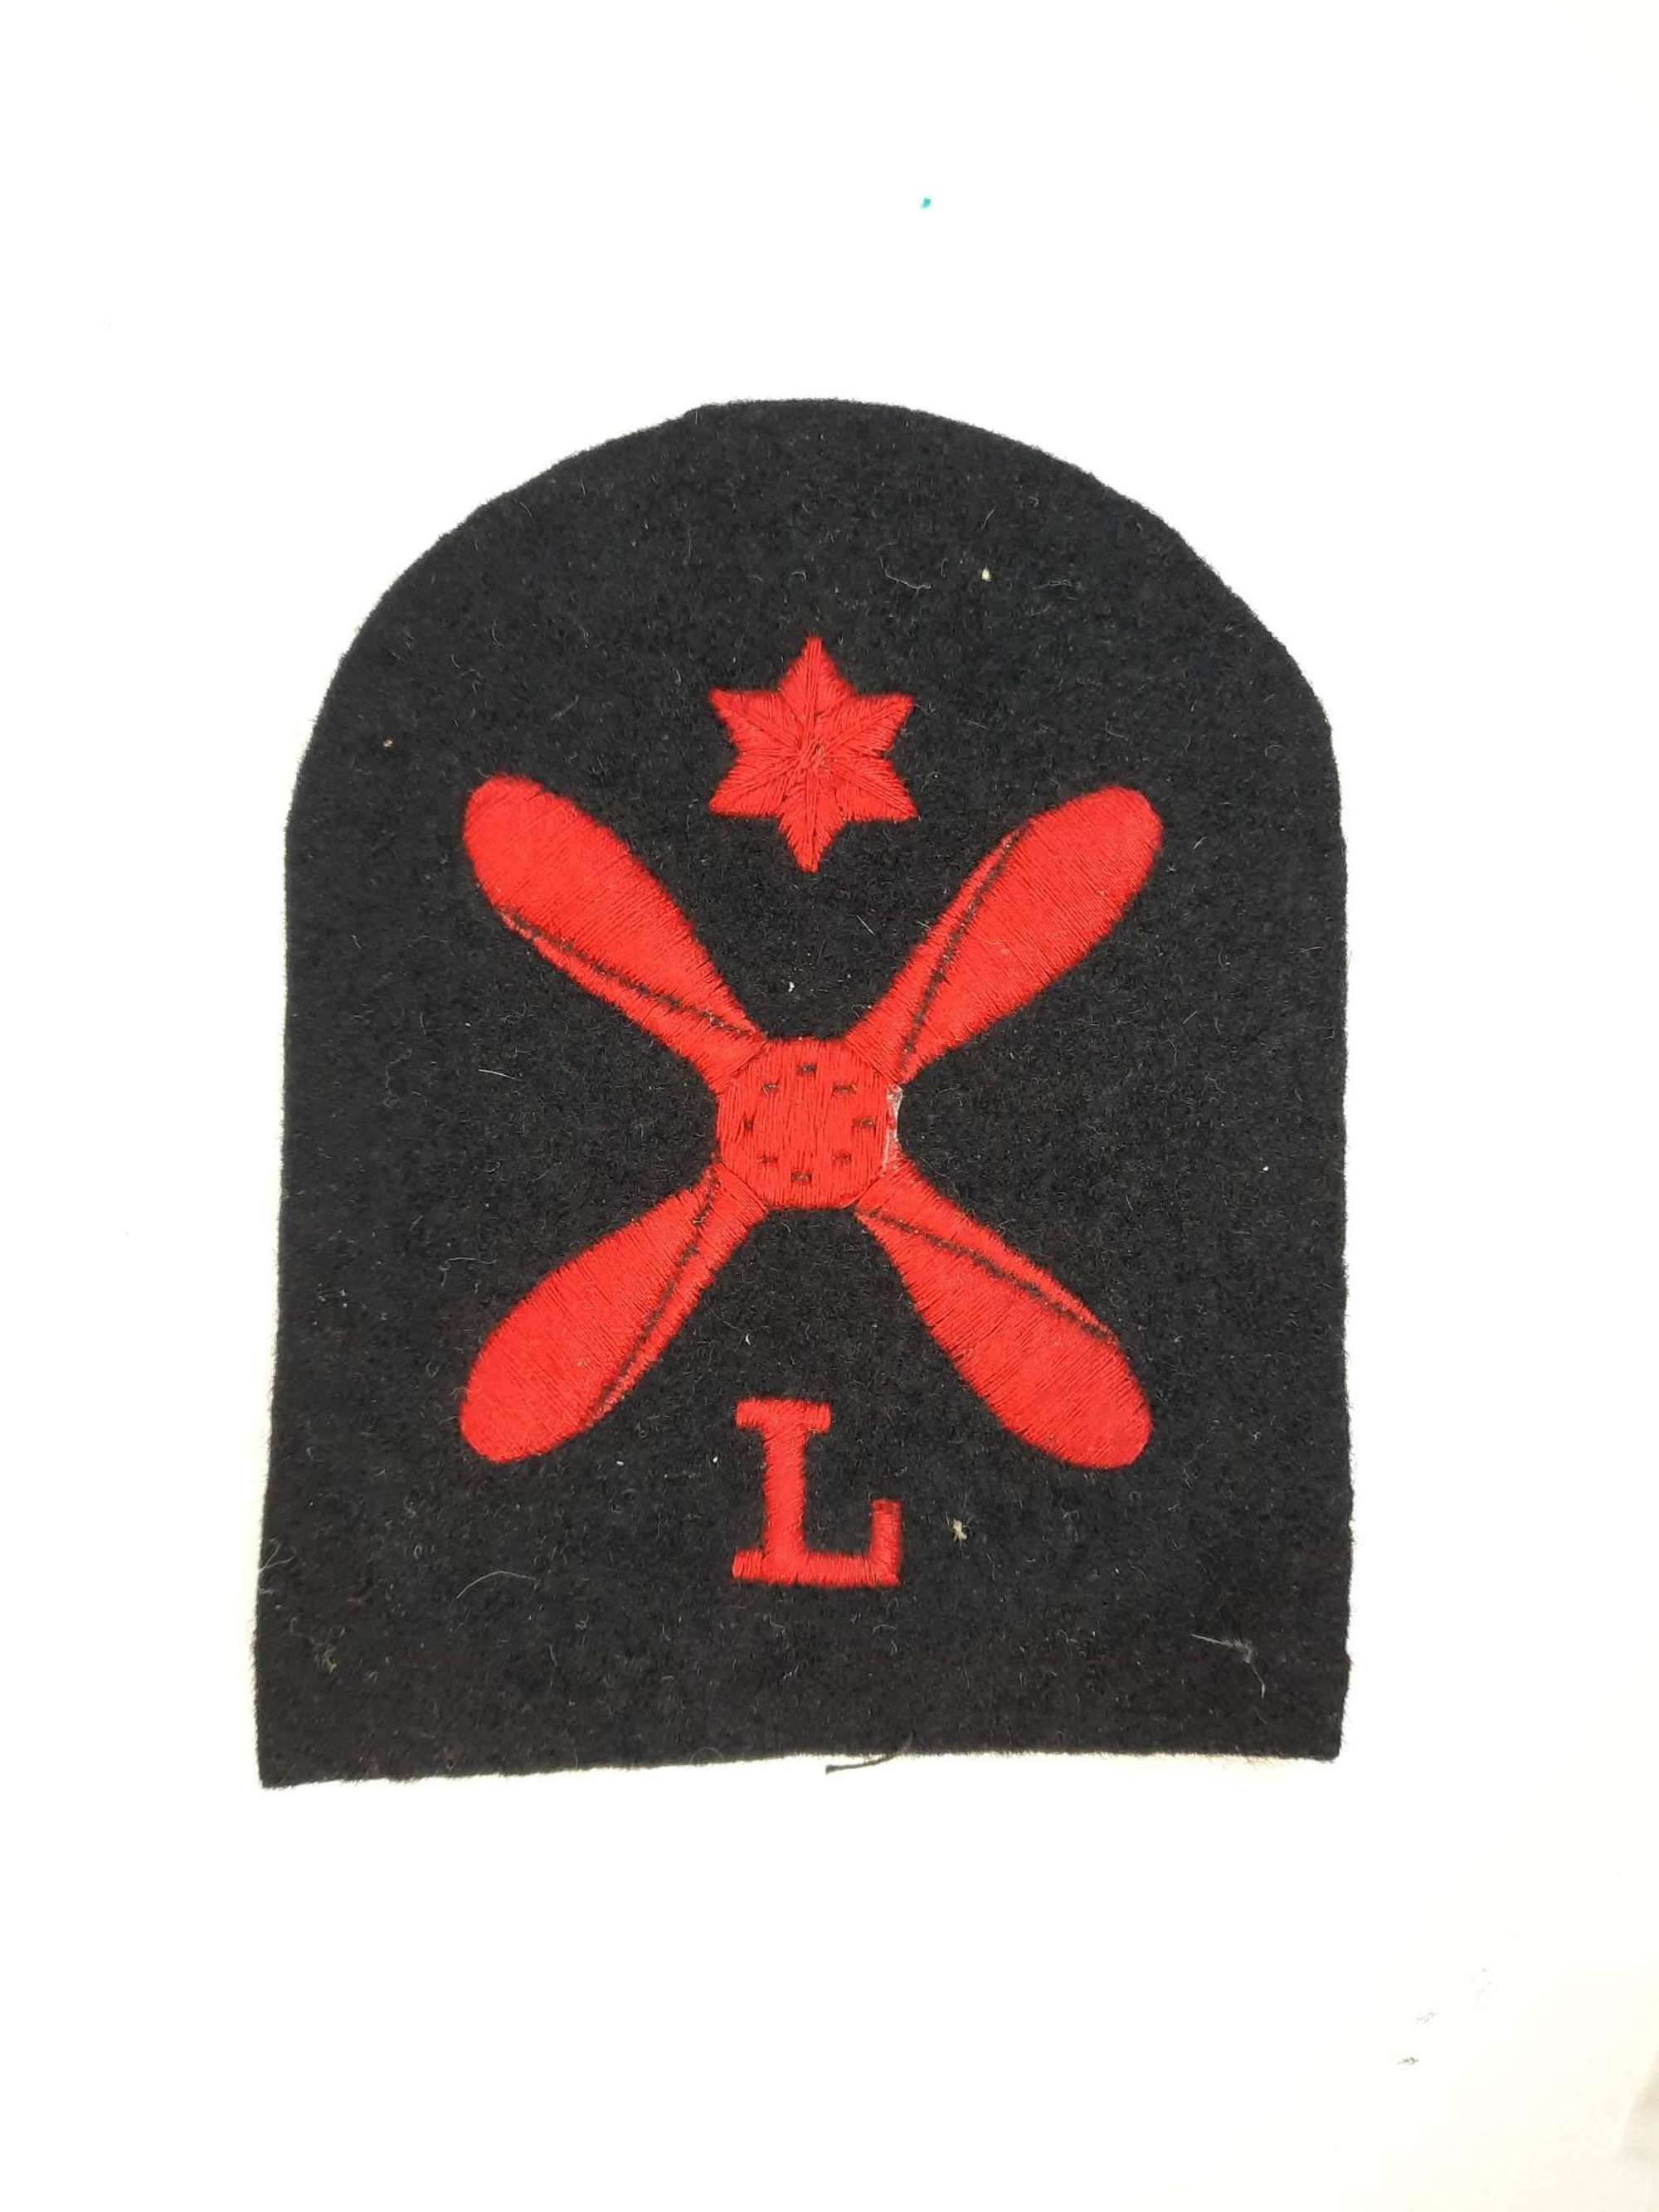 WW2 Royal Navy Leading Air Fitter Electrical Patch